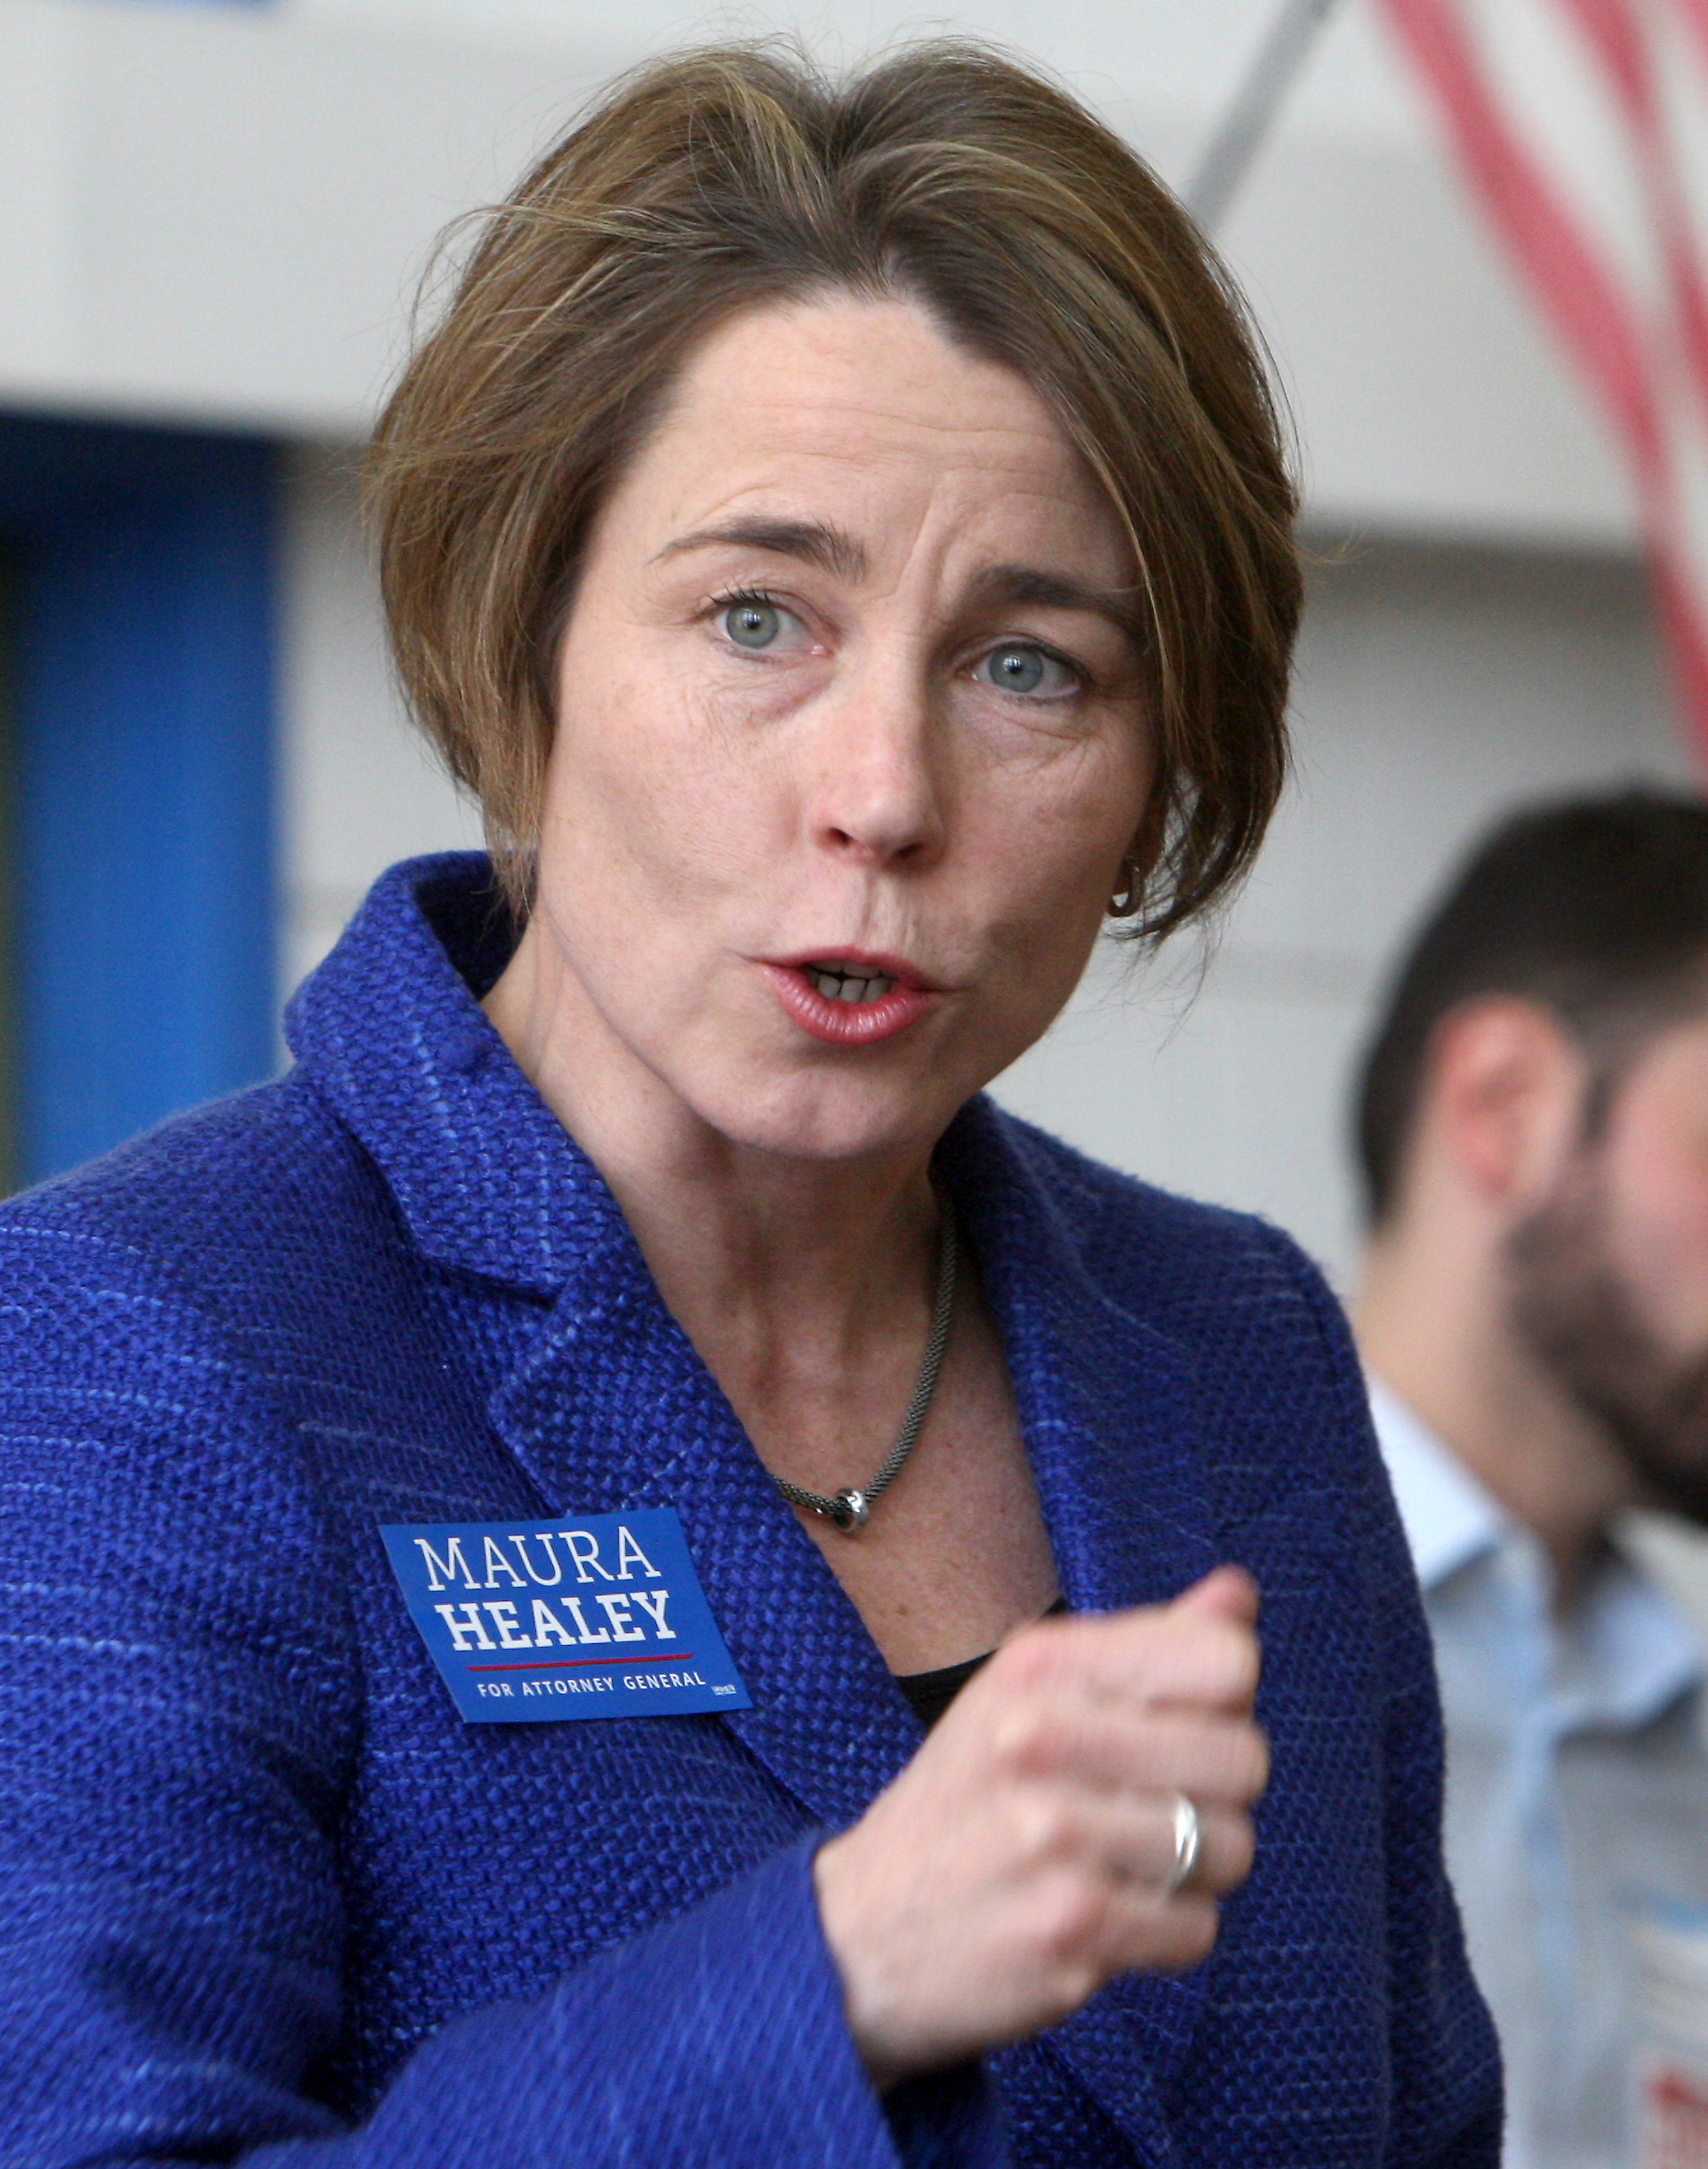 Maura Healey Wiki: Who Is Her Husband? The Untold Truth We Know About Her Love Life